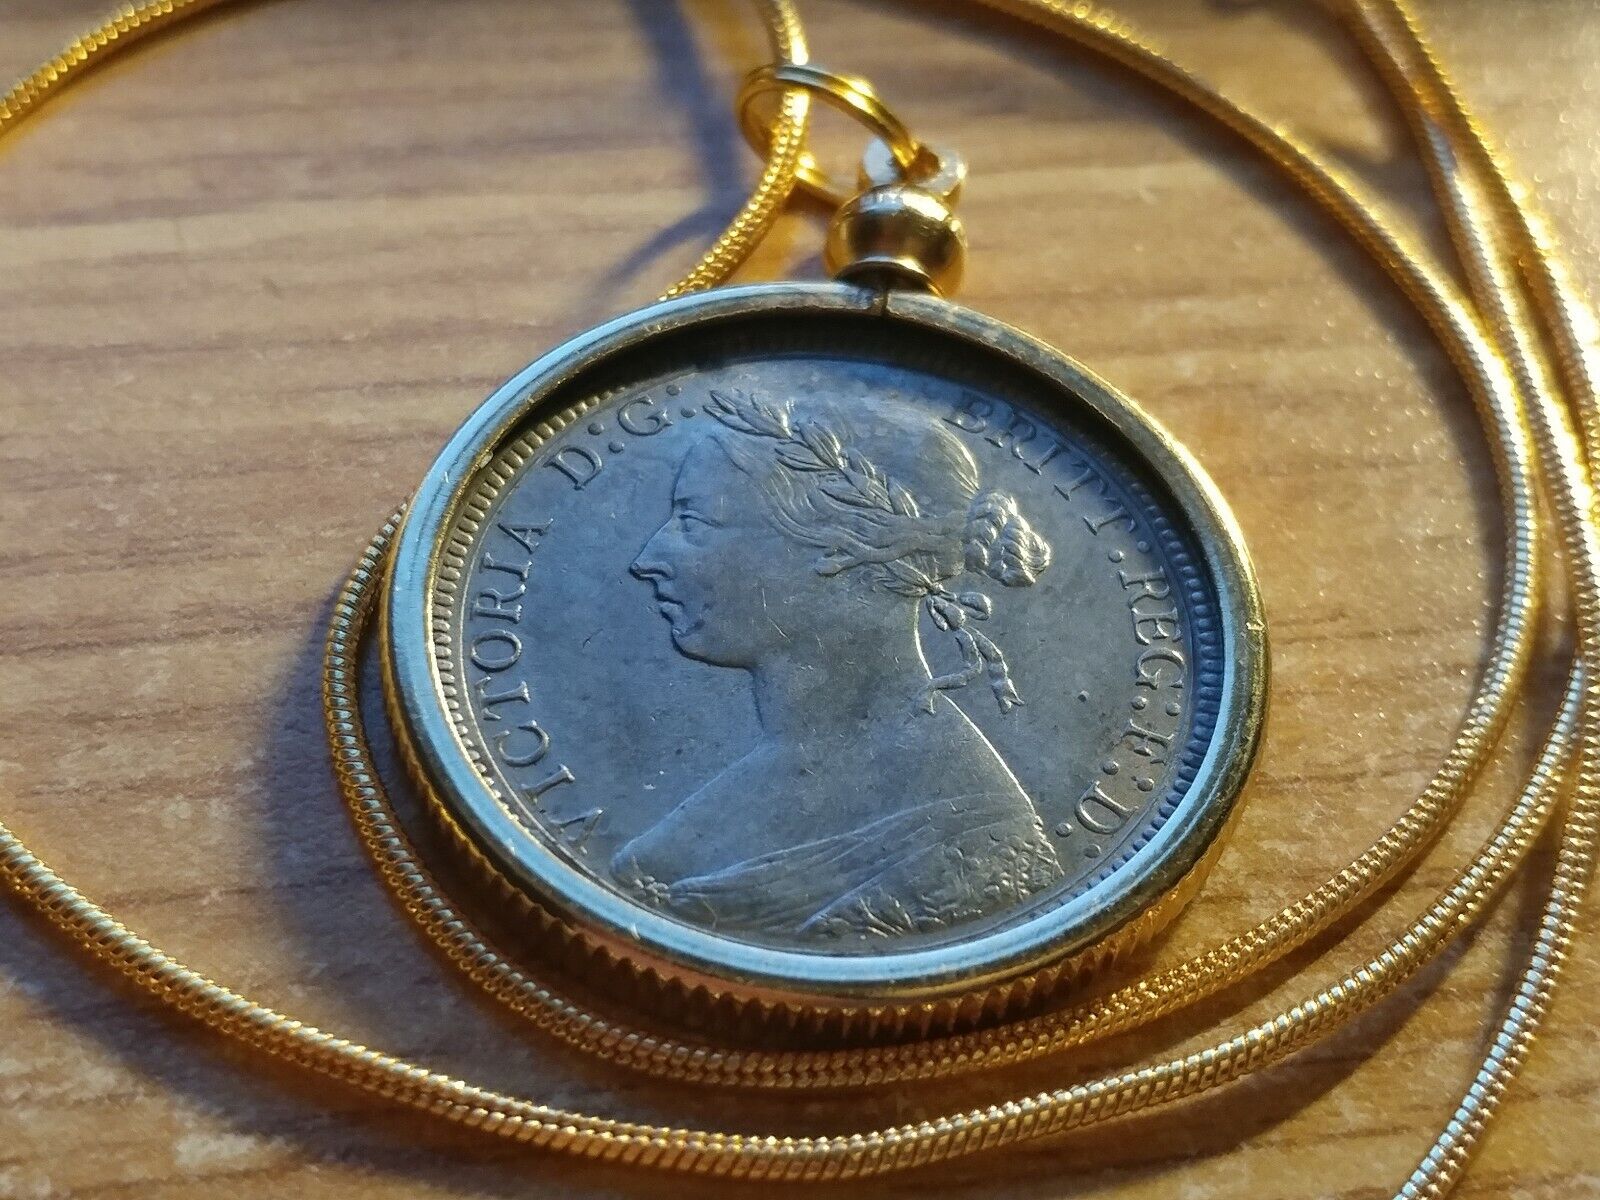 UK 1885 Queen Victoria 1/2 Penny Pendant on a 24" 18k Gold Filled Snake Chain. Honoredallies